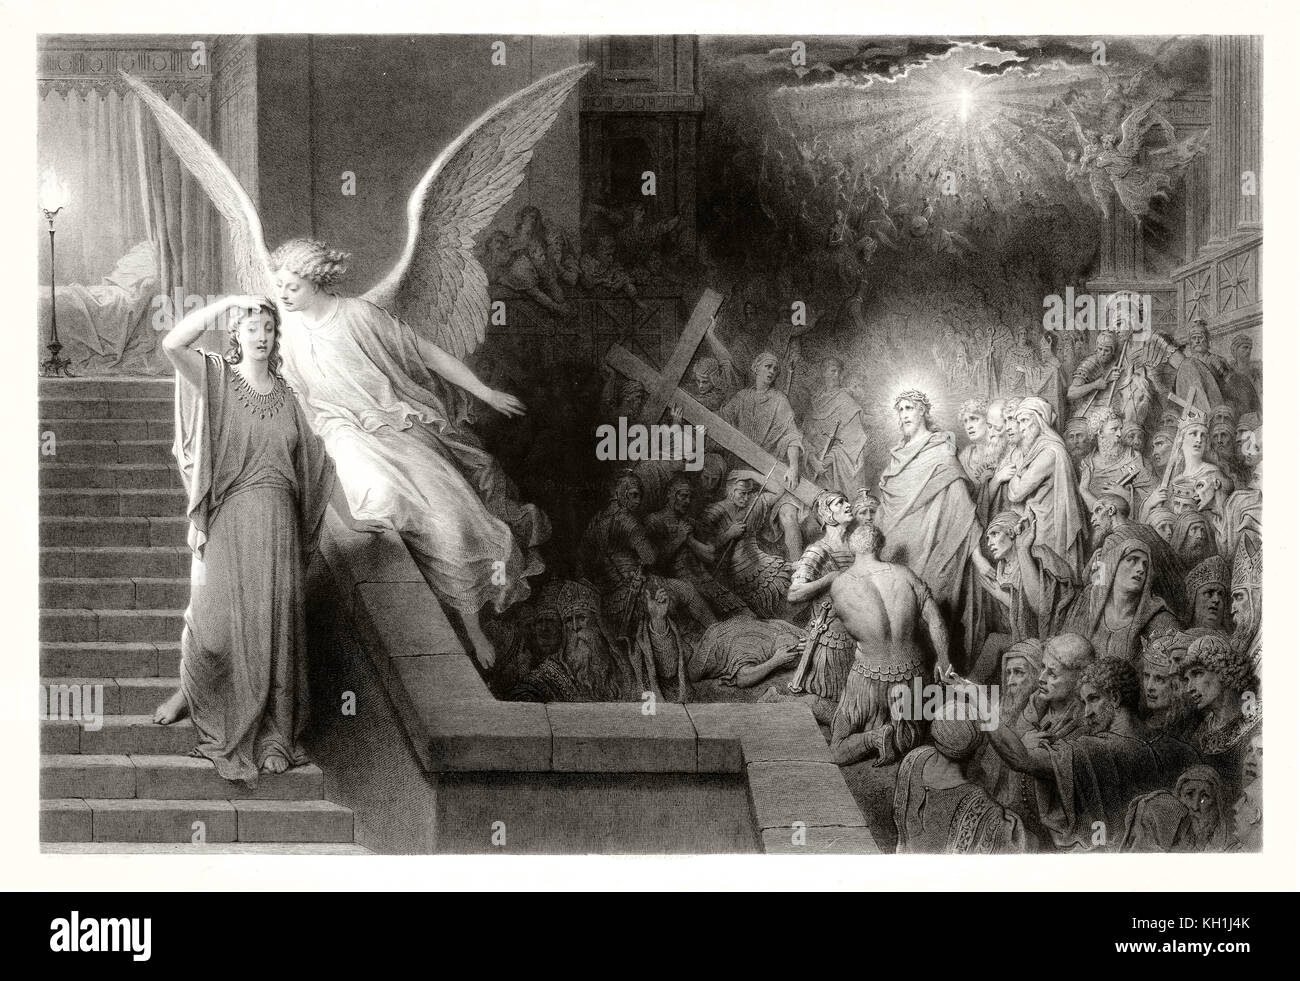 Reproduction of The Dream of Pilate's Wife, Biblical illustration by Gustav Dore. Publ. in London, 1883 Stock Photo